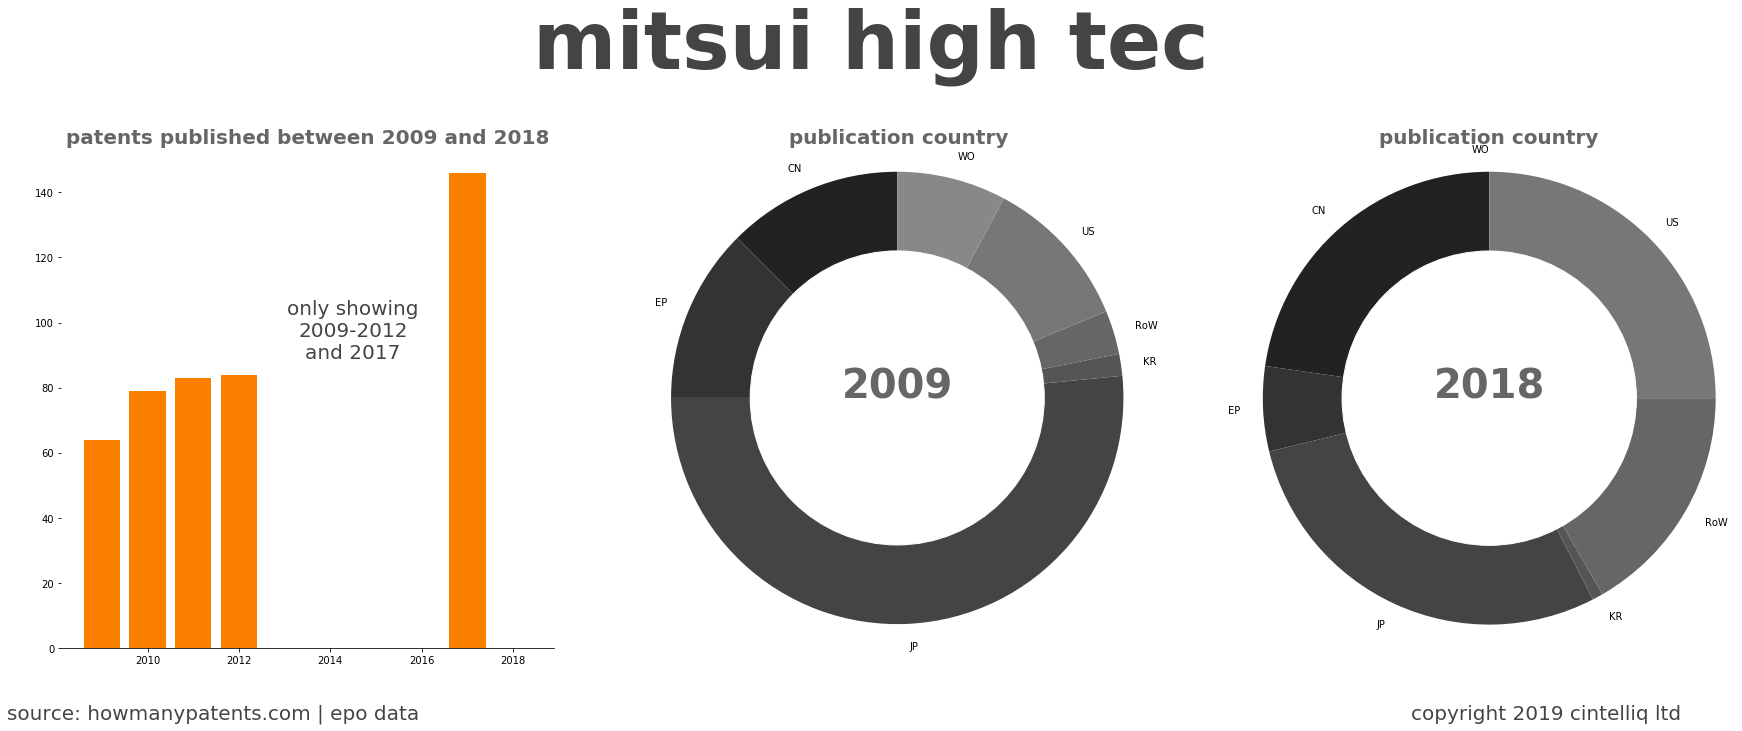 summary of patents for Mitsui High Tec